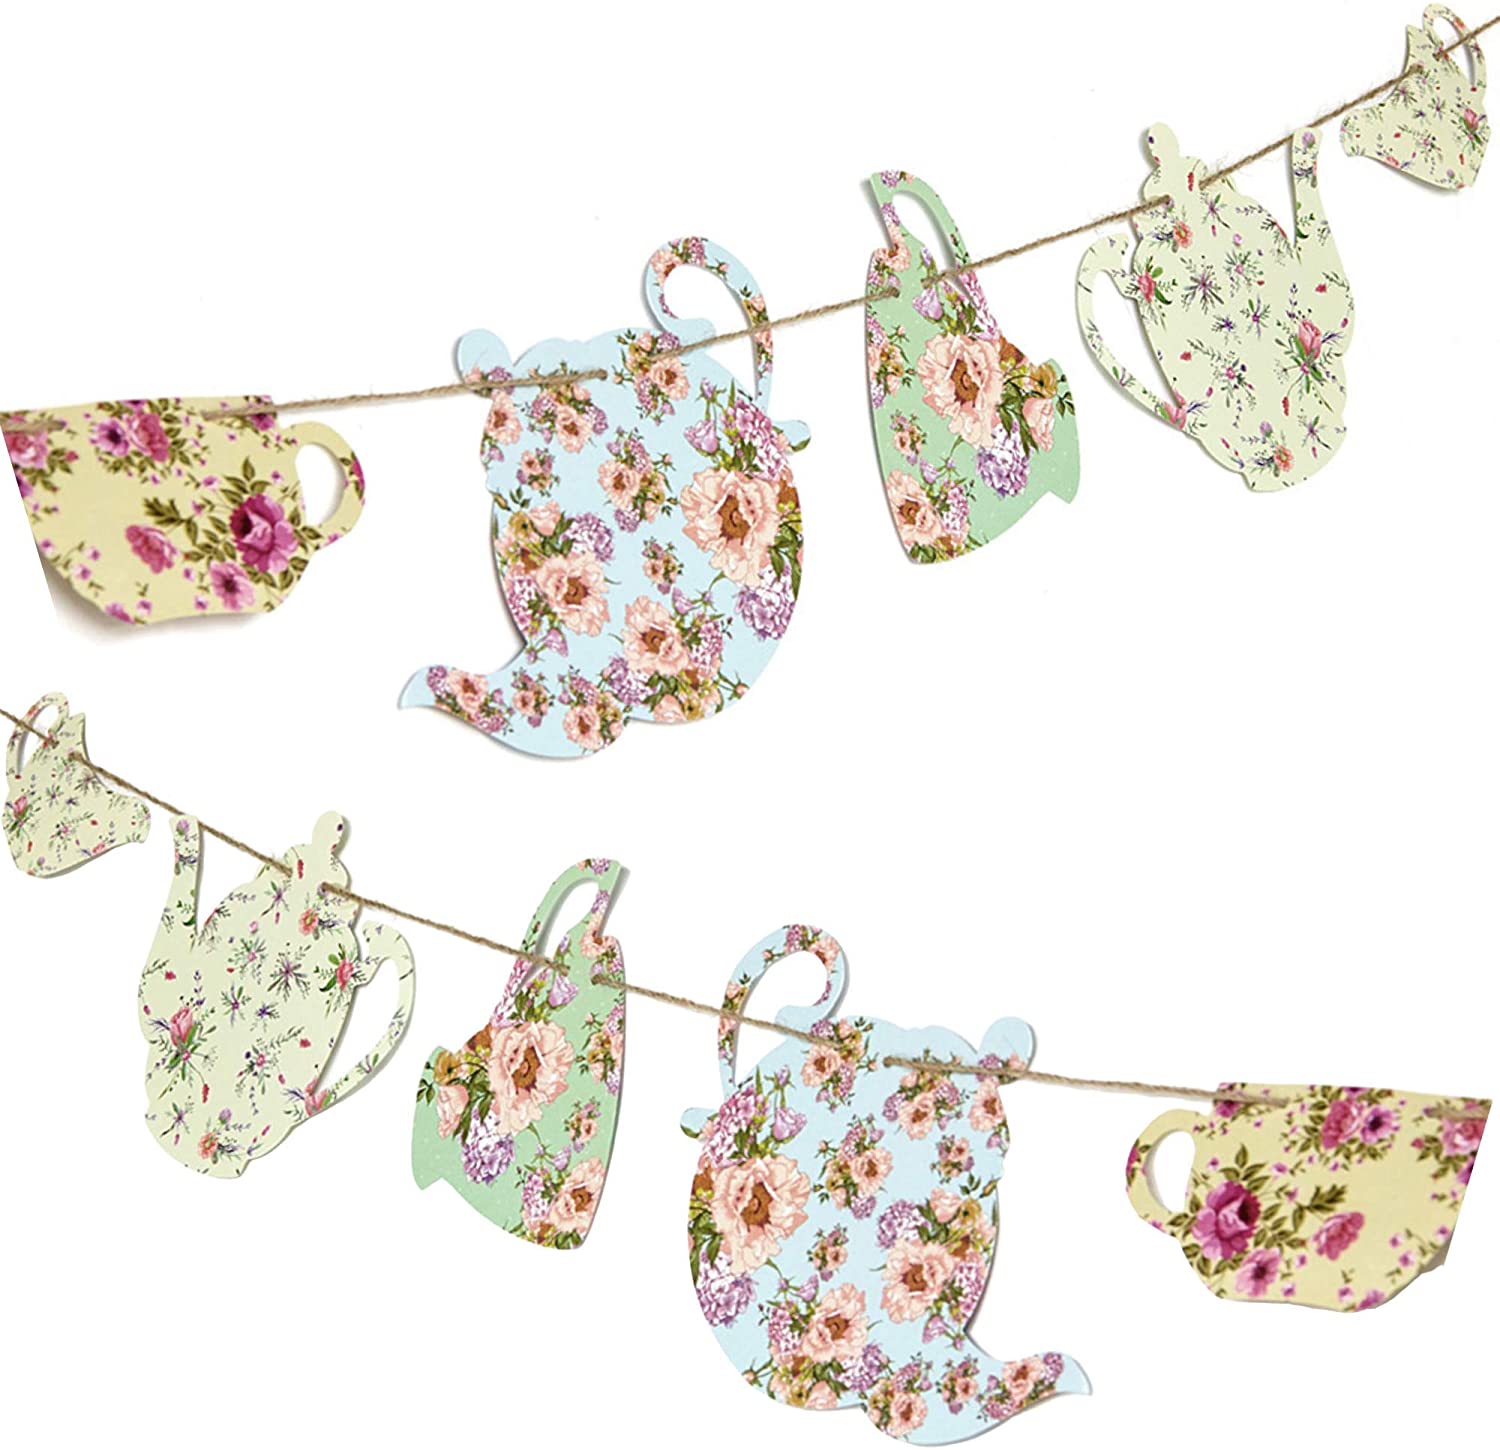 tea-party-ideas-for-kids-garland